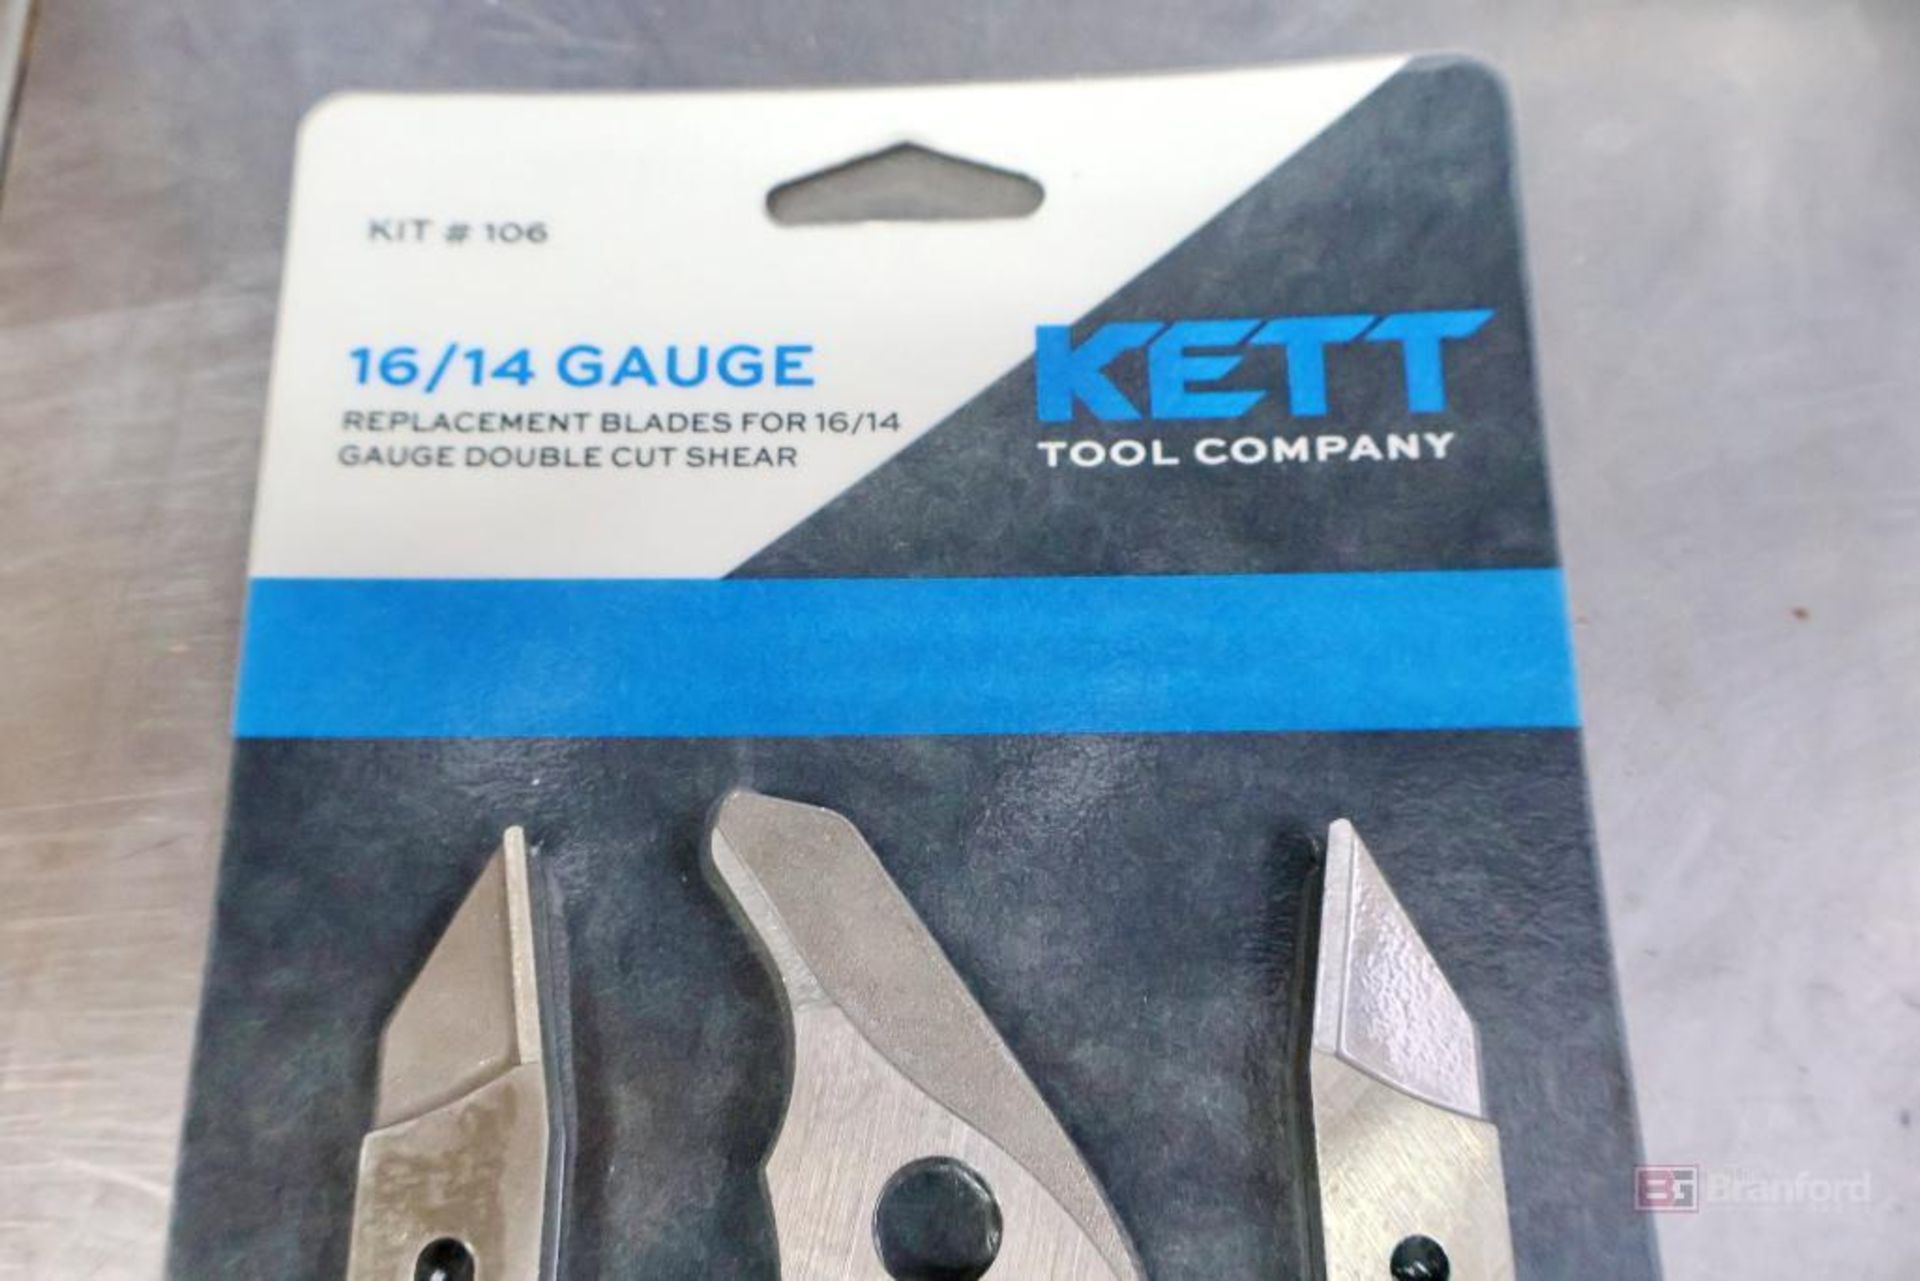 Numerous Kett #106 16/14 Gauge Replacement Blades - Image 4 of 7